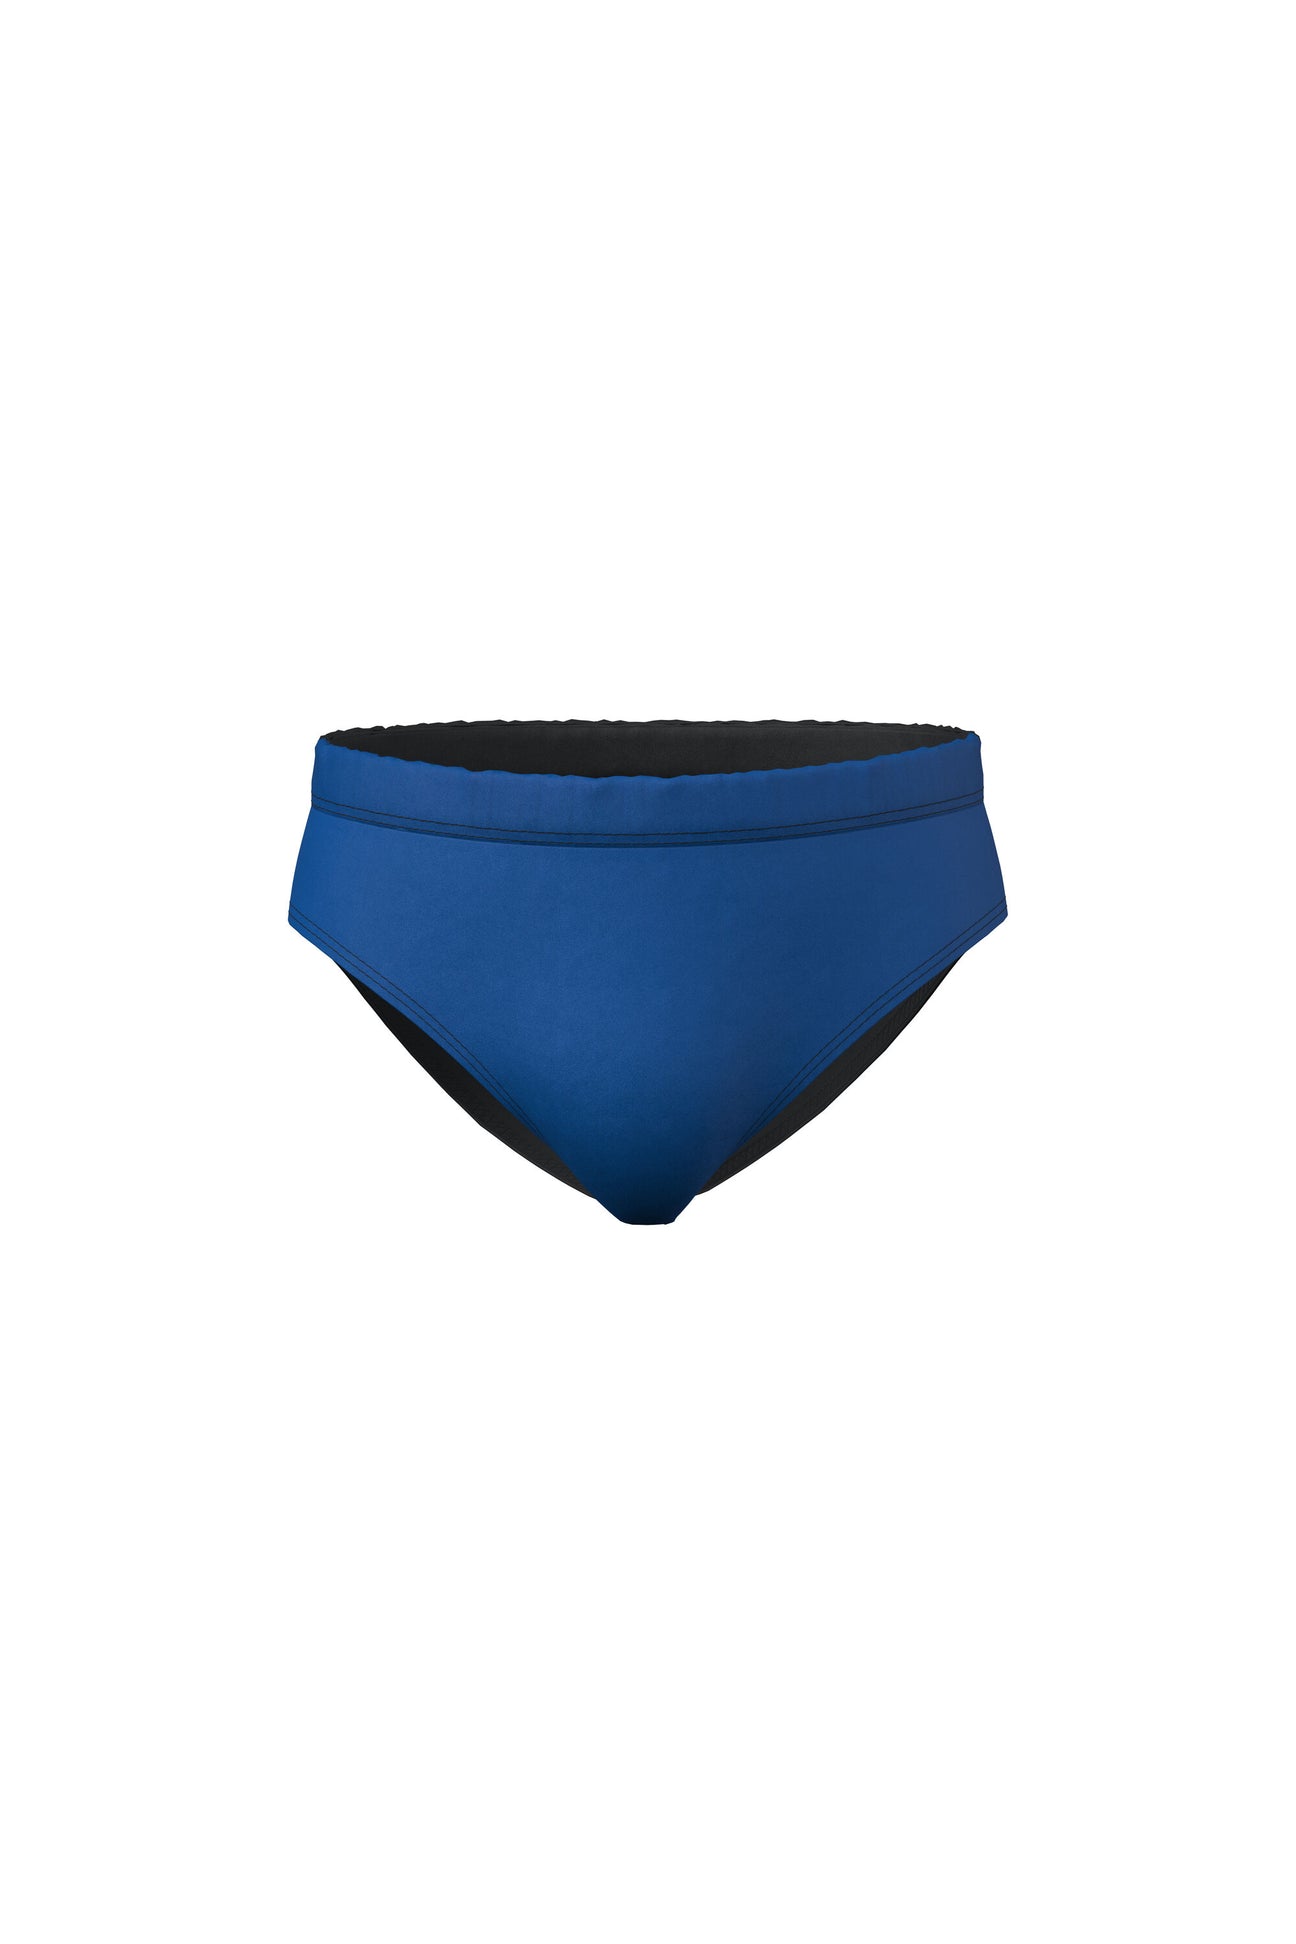 Blue lycra brief costume with writing 